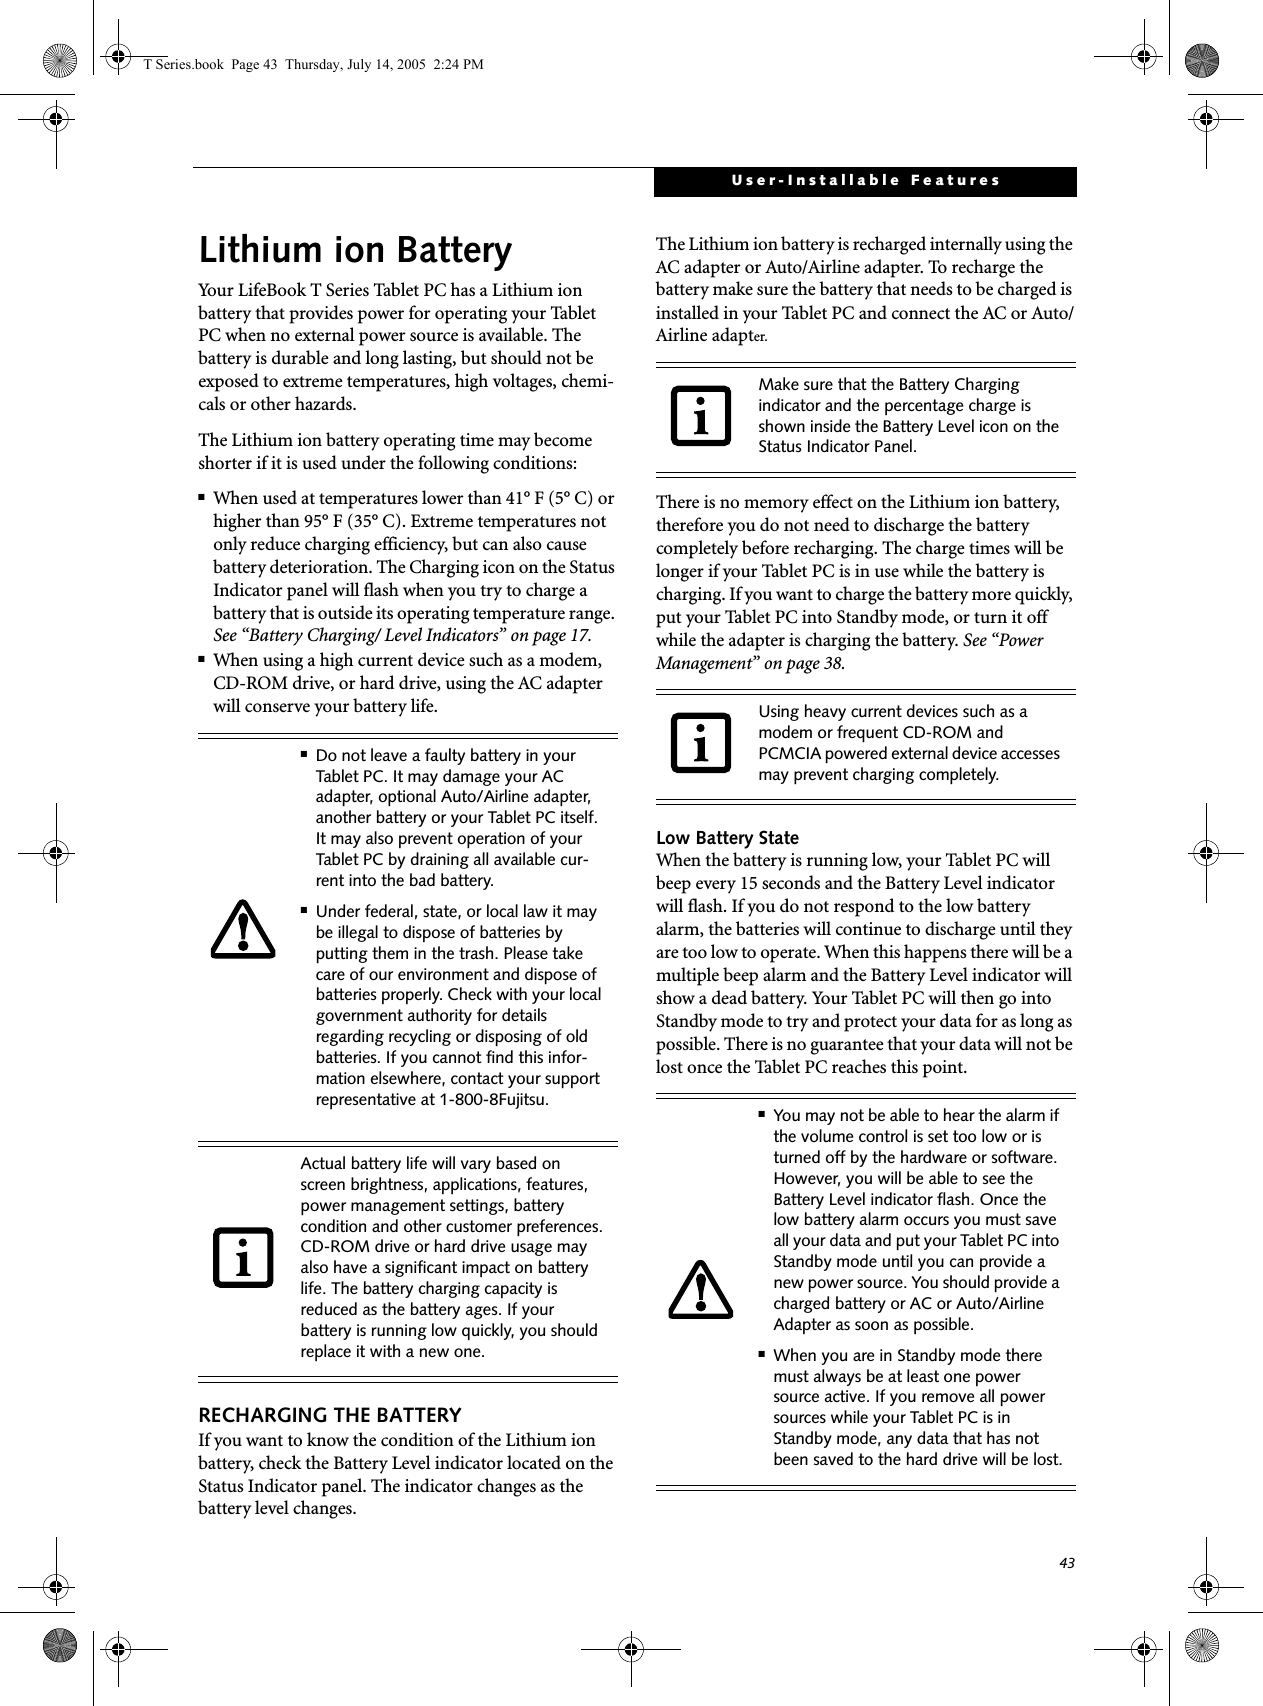 43User-Installable FeaturesLithium ion BatteryYour LifeBook T Series Tablet PC has a Lithium ion battery that provides power for operating your Tablet PC when no external power source is available. The battery is durable and long lasting, but should not be exposed to extreme temperatures, high voltages, chemi-cals or other hazards.The Lithium ion battery operating time may become shorter if it is used under the following conditions:■When used at temperatures lower than 41° F (5° C) or higher than 95° F (35° C). Extreme temperatures not only reduce charging efficiency, but can also cause battery deterioration. The Charging icon on the Status Indicator panel will flash when you try to charge a battery that is outside its operating temperature range. See “Battery Charging/ Level Indicators” on page 17.■When using a high current device such as a modem, CD-ROM drive, or hard drive, using the AC adapter will conserve your battery life.RECHARGING THE BATTERYIf you want to know the condition of the Lithium ion battery, check the Battery Level indicator located on the Status Indicator panel. The indicator changes as the battery level changes.The Lithium ion battery is recharged internally using the AC adapter or Auto/Airline adapter. To recharge the battery make sure the battery that needs to be charged is installed in your Tablet PC and connect the AC or Auto/Airline adapter.There is no memory effect on the Lithium ion battery, therefore you do not need to discharge the battery completely before recharging. The charge times will be longer if your Tablet PC is in use while the battery is charging. If you want to charge the battery more quickly, put your Tablet PC into Standby mode, or turn it off while the adapter is charging the battery. See “Power Management” on page 38.Low Battery StateWhen the battery is running low, your Tablet PC will beep every 15 seconds and the Battery Level indicator will flash. If you do not respond to the low battery alarm, the batteries will continue to discharge until they are too low to operate. When this happens there will be a multiple beep alarm and the Battery Level indicator will show a dead battery. Your Tablet PC will then go into Standby mode to try and protect your data for as long as possible. There is no guarantee that your data will not be lost once the Tablet PC reaches this point.■Do not leave a faulty battery in your Tablet PC. It may damage your AC adapter, optional Auto/Airline adapter, another battery or your Tablet PC itself. It may also prevent operation of your Tablet PC by draining all available cur-rent into the bad battery.■Under federal, state, or local law it may be illegal to dispose of batteries by putting them in the trash. Please take care of our environment and dispose of batteries properly. Check with your local government authority for details regarding recycling or disposing of old batteries. If you cannot find this infor-mation elsewhere, contact your support representative at 1-800-8Fujitsu.Actual battery life will vary based on screen brightness, applications, features, power management settings, battery condition and other customer preferences.CD-ROM drive or hard drive usage may also have a significant impact on battery life. The battery charging capacity is reduced as the battery ages. If your battery is running low quickly, you should replace it with a new one.Make sure that the Battery Charging indicator and the percentage charge is shown inside the Battery Level icon on the Status Indicator Panel.Using heavy current devices such as a modem or frequent CD-ROM and PCMCIA powered external device accesses may prevent charging completely.■You may not be able to hear the alarm if the volume control is set too low or is turned off by the hardware or software. However, you will be able to see the Battery Level indicator flash. Once the low battery alarm occurs you must save all your data and put your Tablet PC into Standby mode until you can provide a new power source. You should provide a charged battery or AC or Auto/Airline Adapter as soon as possible. ■When you are in Standby mode there must always be at least one power source active. If you remove all power sources while your Tablet PC is in Standby mode, any data that has not been saved to the hard drive will be lost.T Series.book  Page 43  Thursday, July 14, 2005  2:24 PM